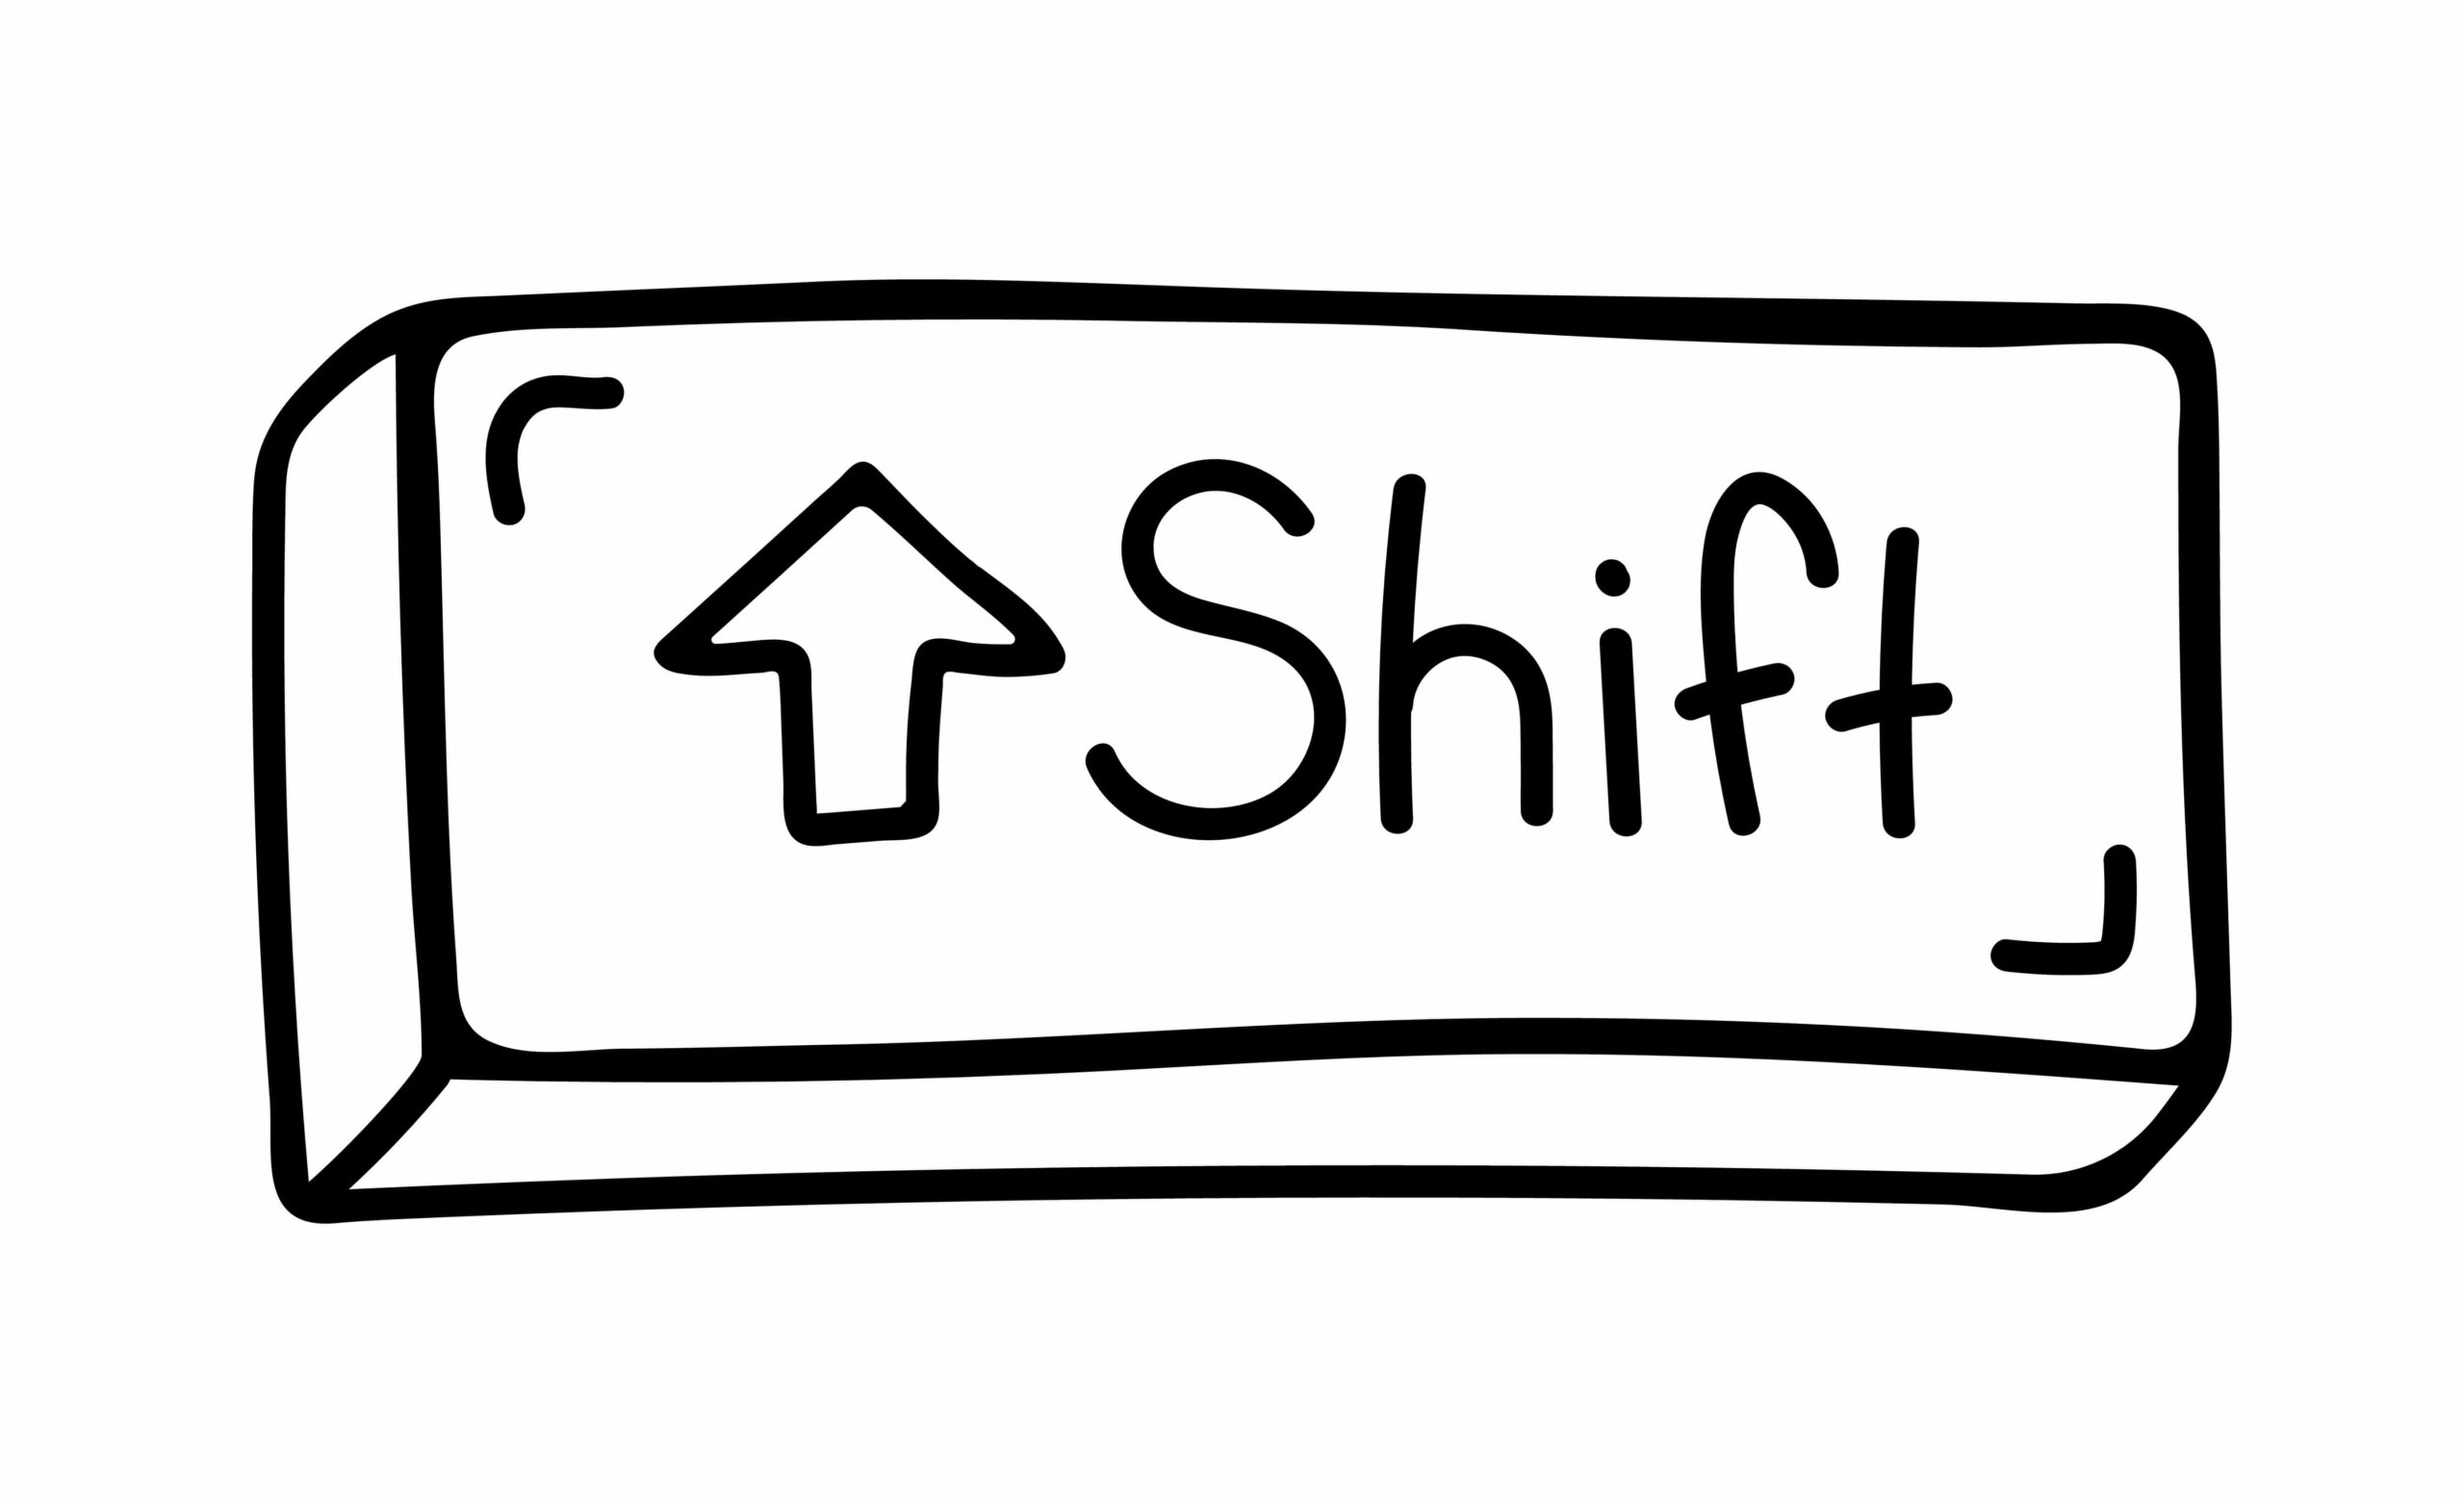 [FIXED] How to Fix Shift Key Not Working on Windows 10 PC?